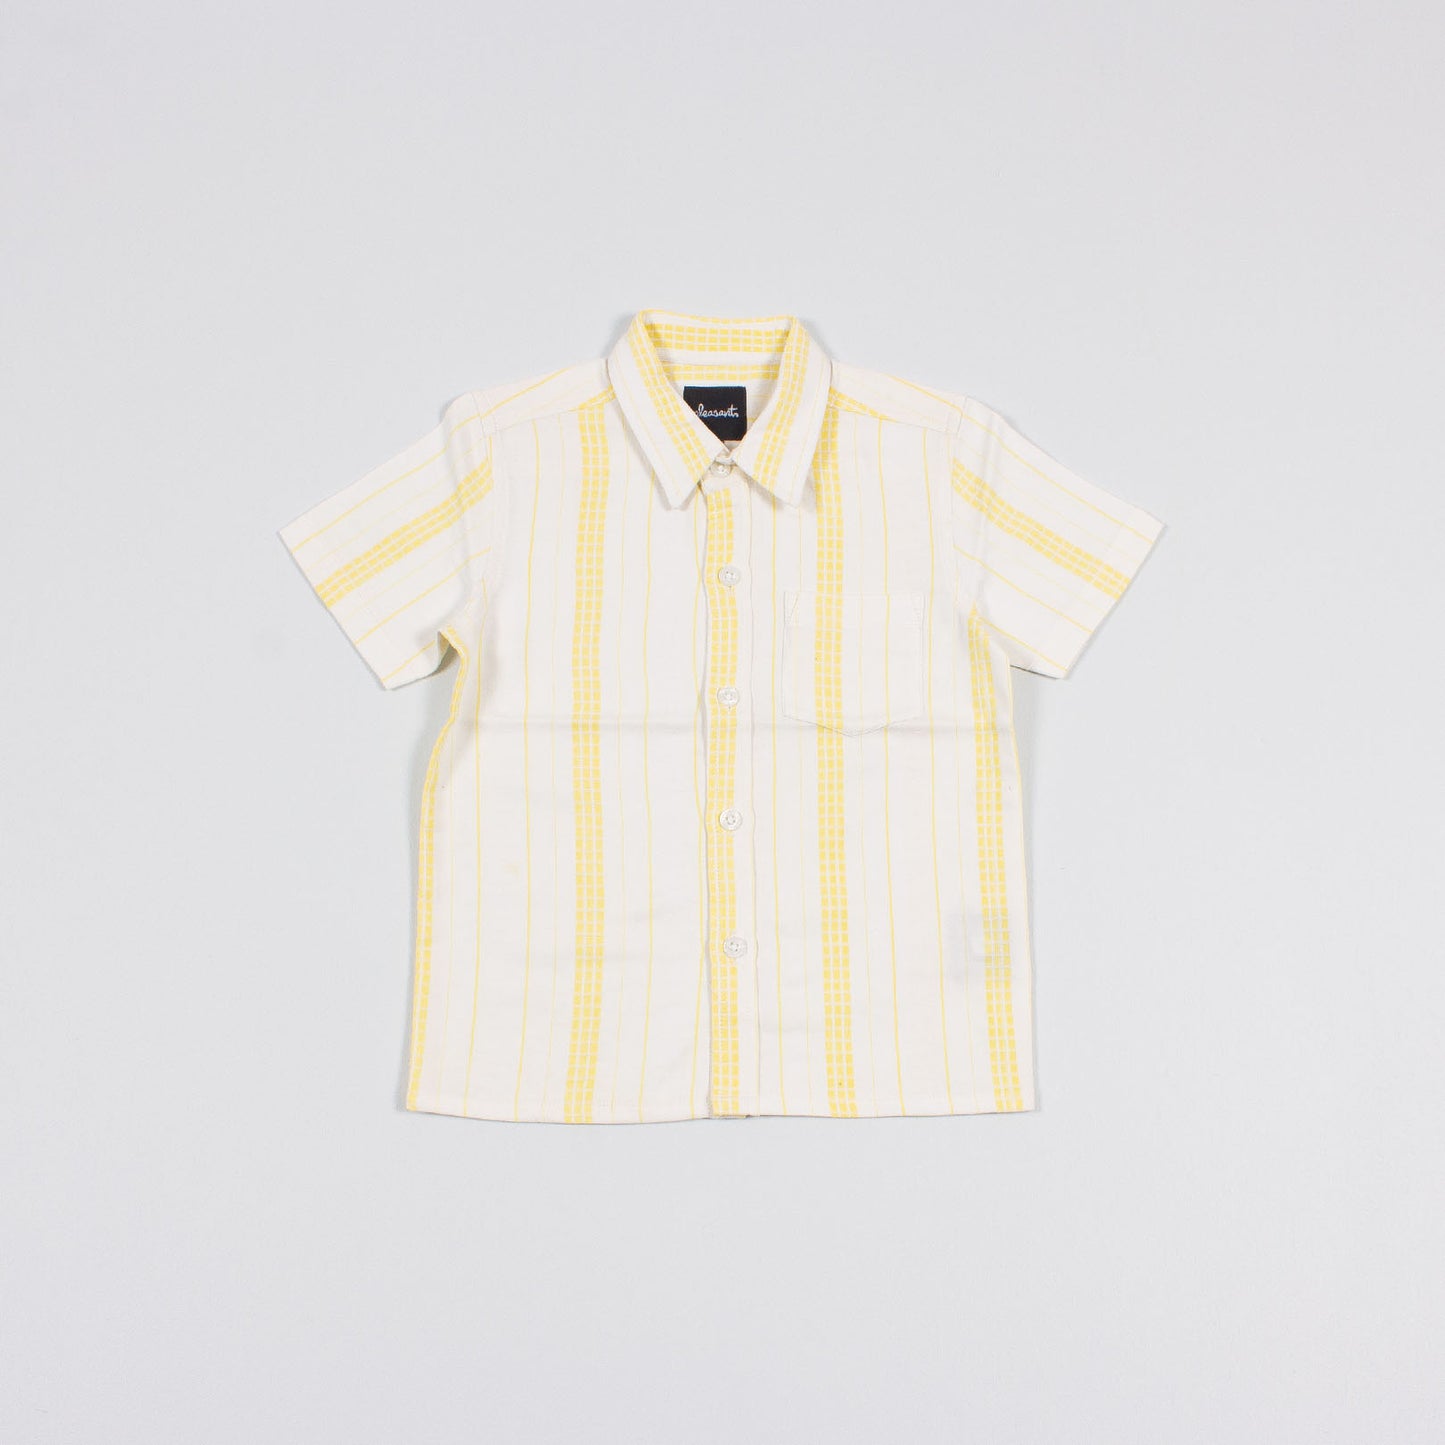 Yellow sun striped upcycled baby shirt